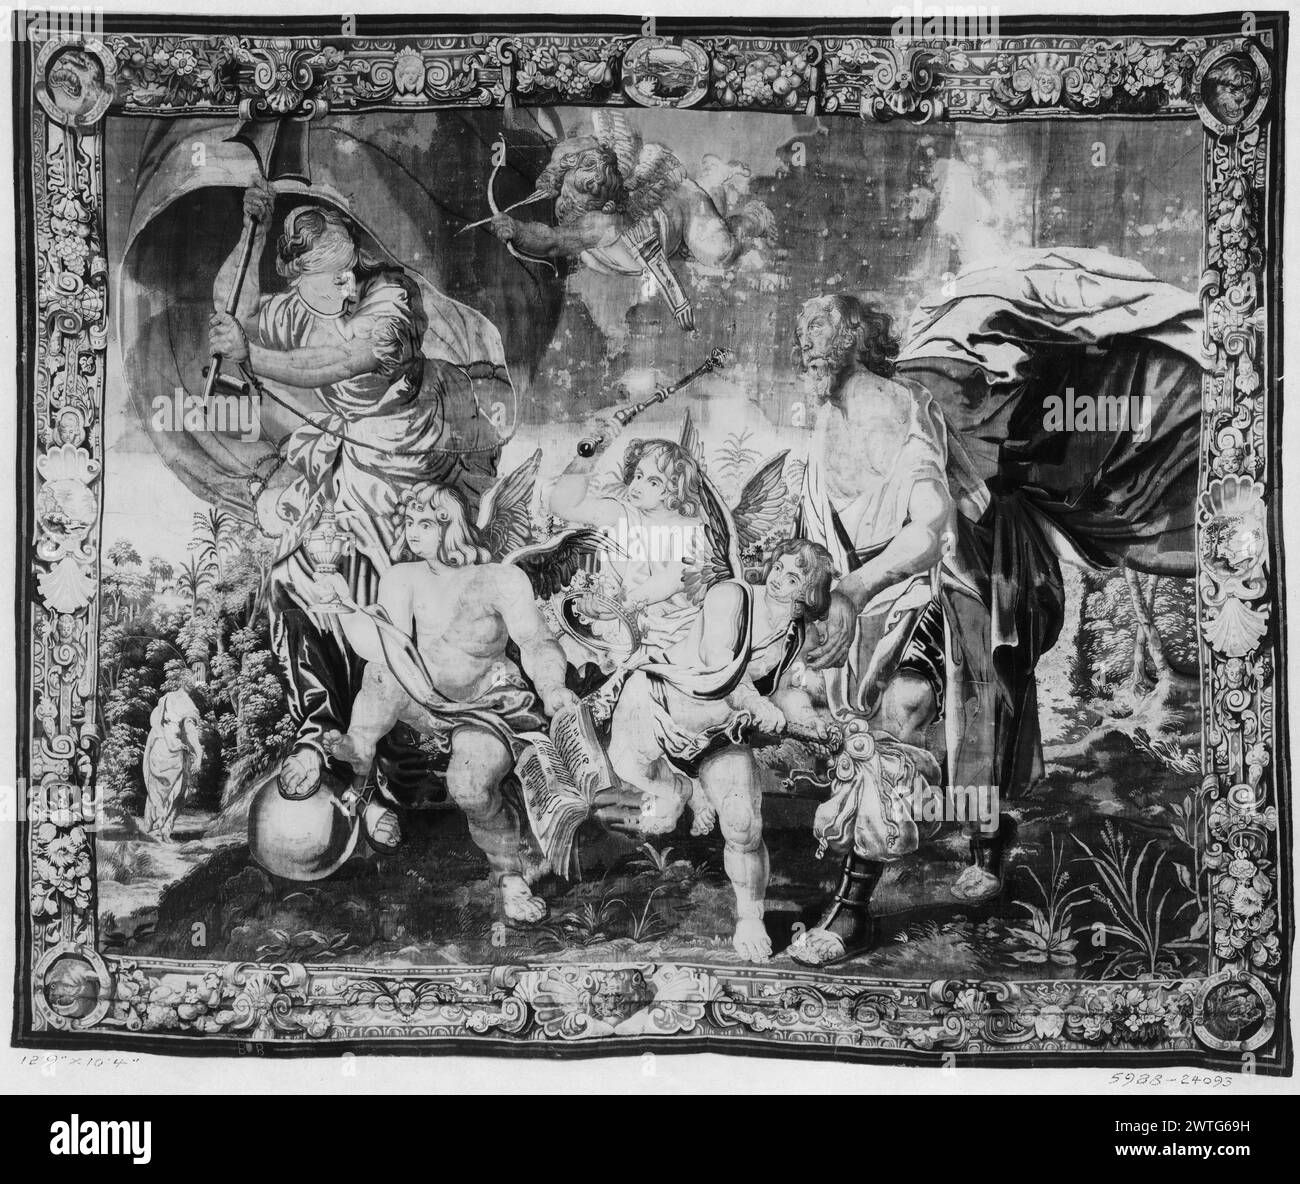 Fortune. Sallaert, Anthonis (Flemish, ca.1590-1657/58) (author of design, attr.) [draughtsman] c. 1640-1660 Tapestry Dimensions: H 10'4' x W 12'9' Tapestry Materials/Techniques: unknown Culture: Flemish Weaving Center: Brussels Ownership History: French & Co. purchased from Chadbourne 12/28/1921; sold to Stroheim & Romann 11/20/22. Inscriptions: Brussels city mark on lower guard, left of center Fortune blindfolded, resting right foot on globe & holding rudder with billowing sail (L, middle ground), Cupid floating & aiming arrow at Fortune (center, top), 3 winged boys carrying crown, scepter, b Stock Photo